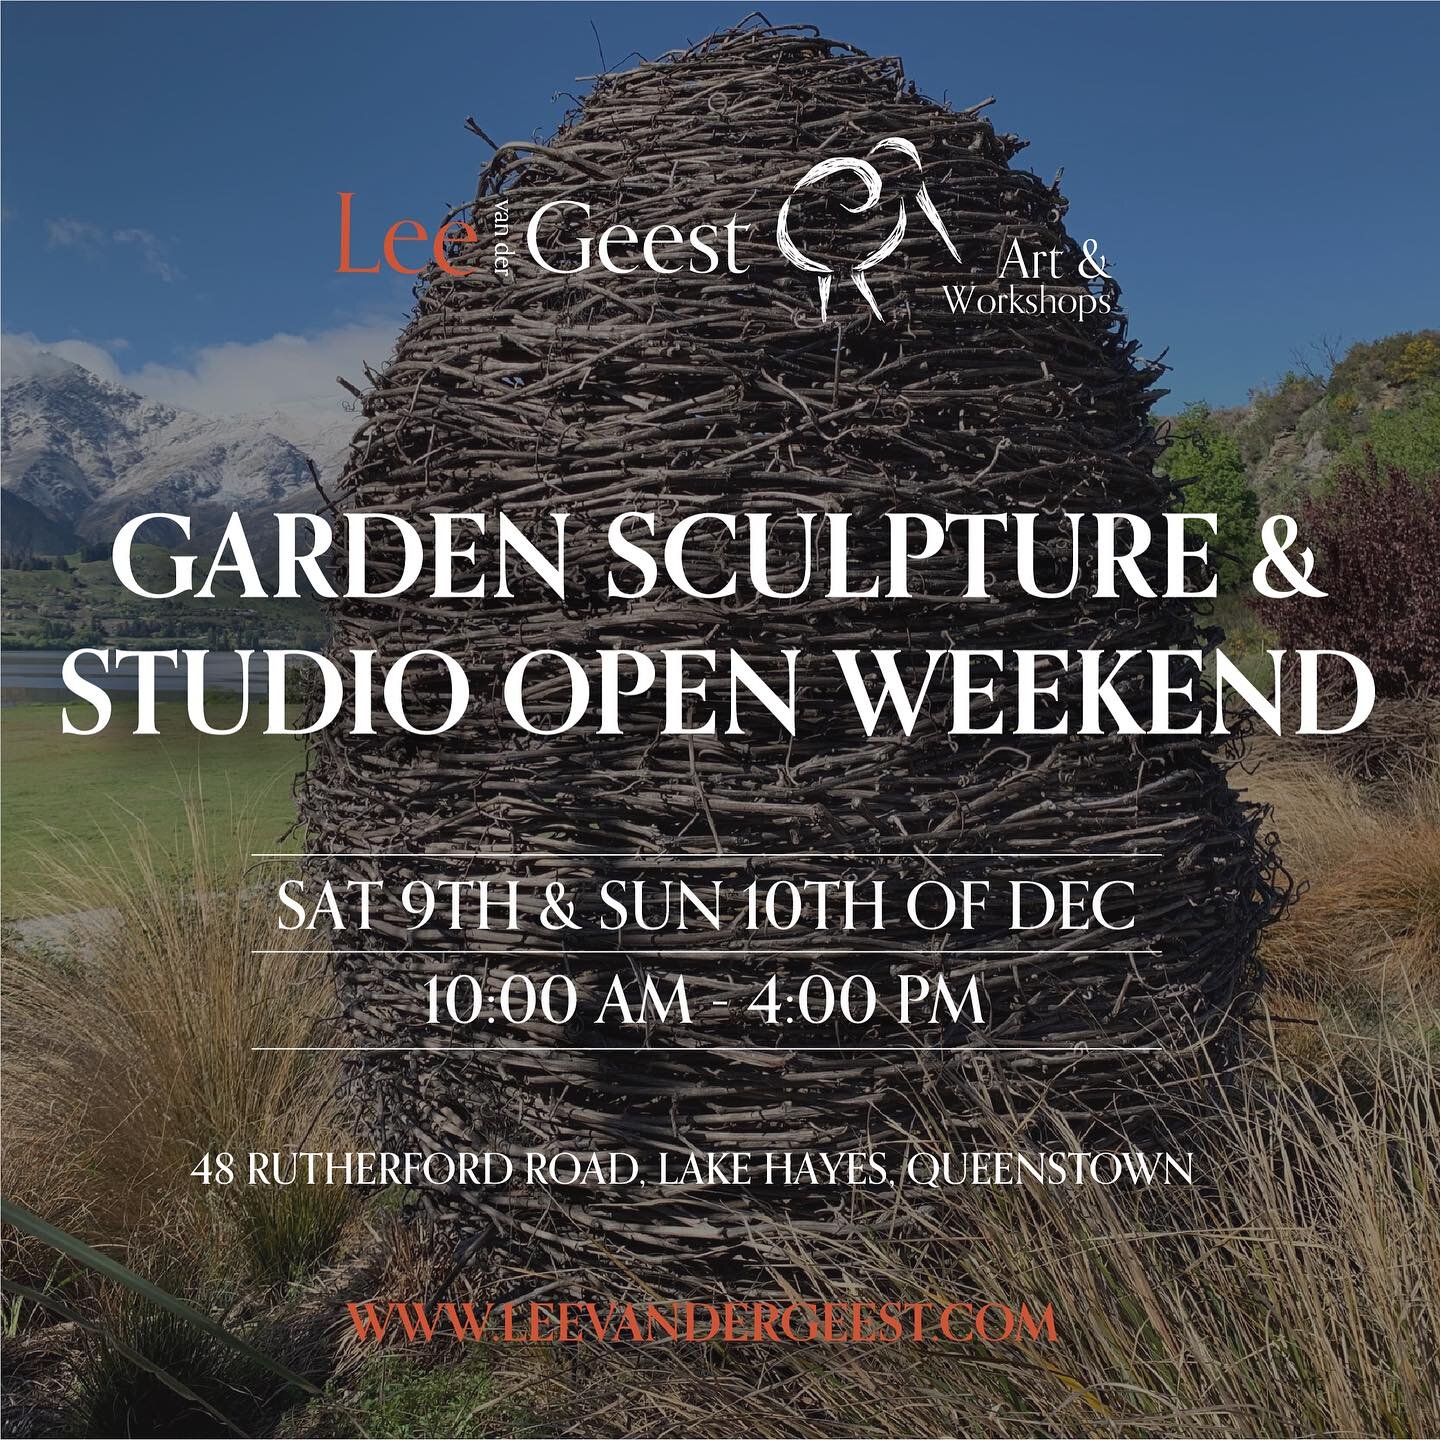 It&rsquo;s been a long time in the making, but I am excited to finally share my garden sculptures and studio with you guys to come and see what I&rsquo;ve been creating.

Come and say hi, enjoy a glass of bubbles and take a stroll around the garden. 